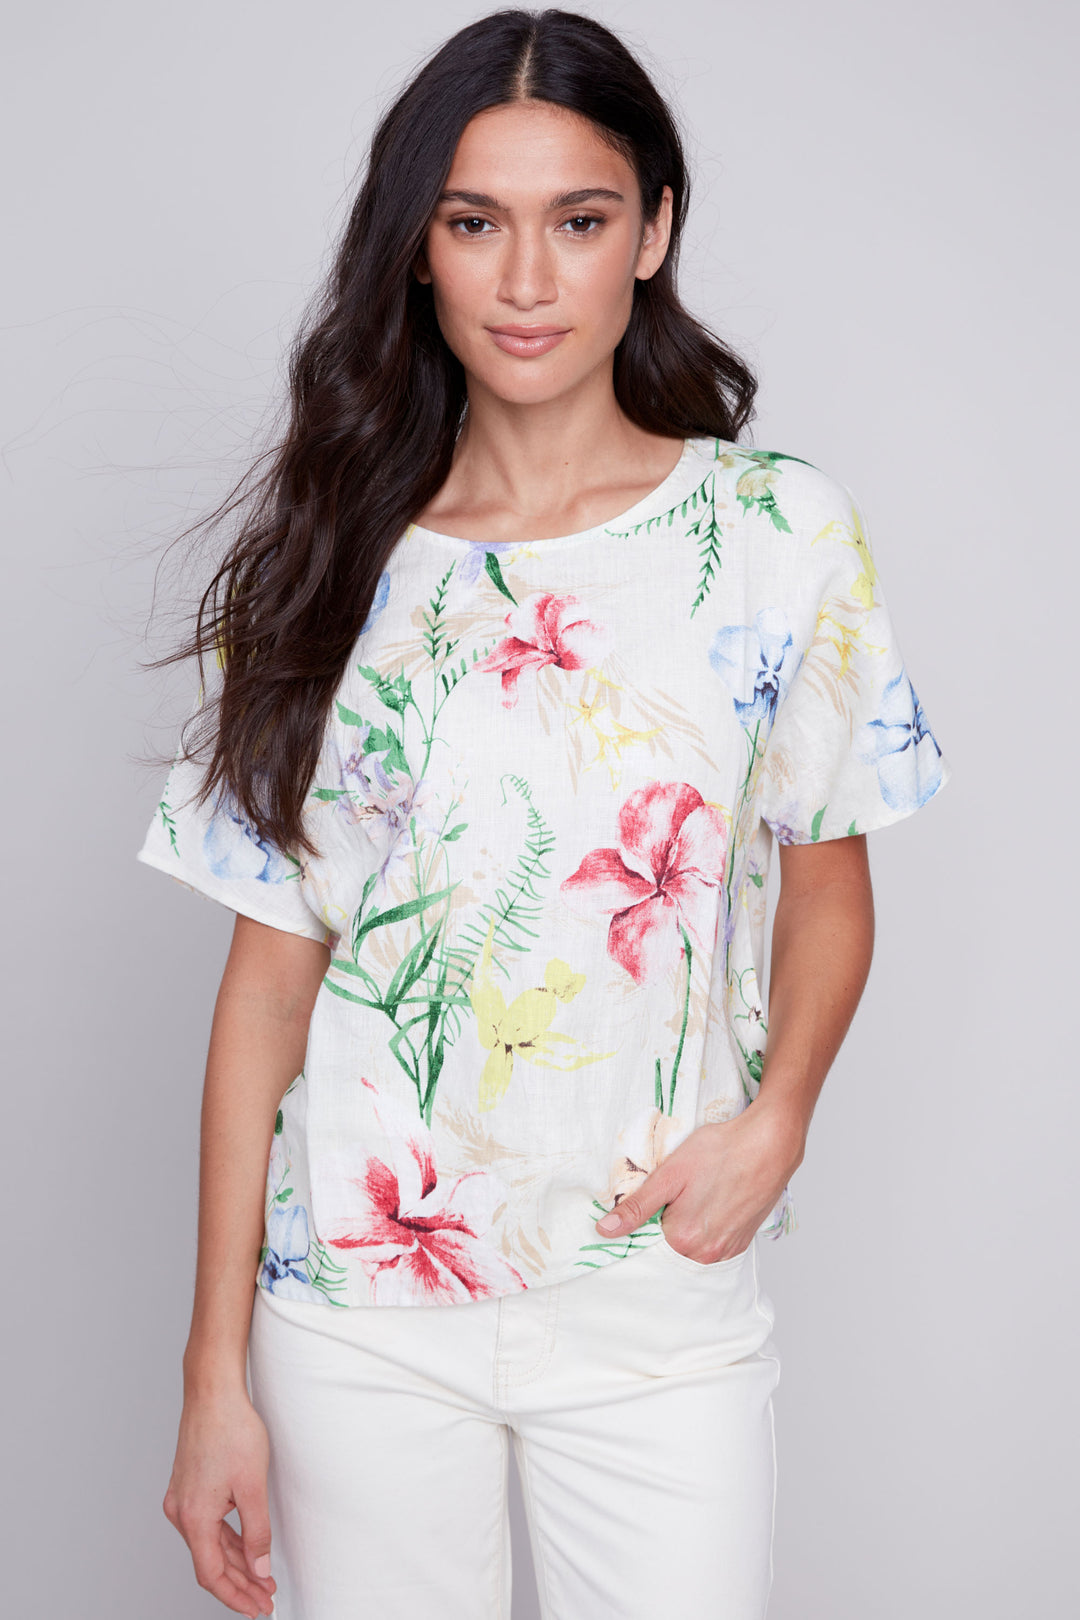 This top's all-linen fabric keeps it light, while its round neck and dolman short sleeves make for the perfect fit. And don't forget the playful printed floral design pattern.